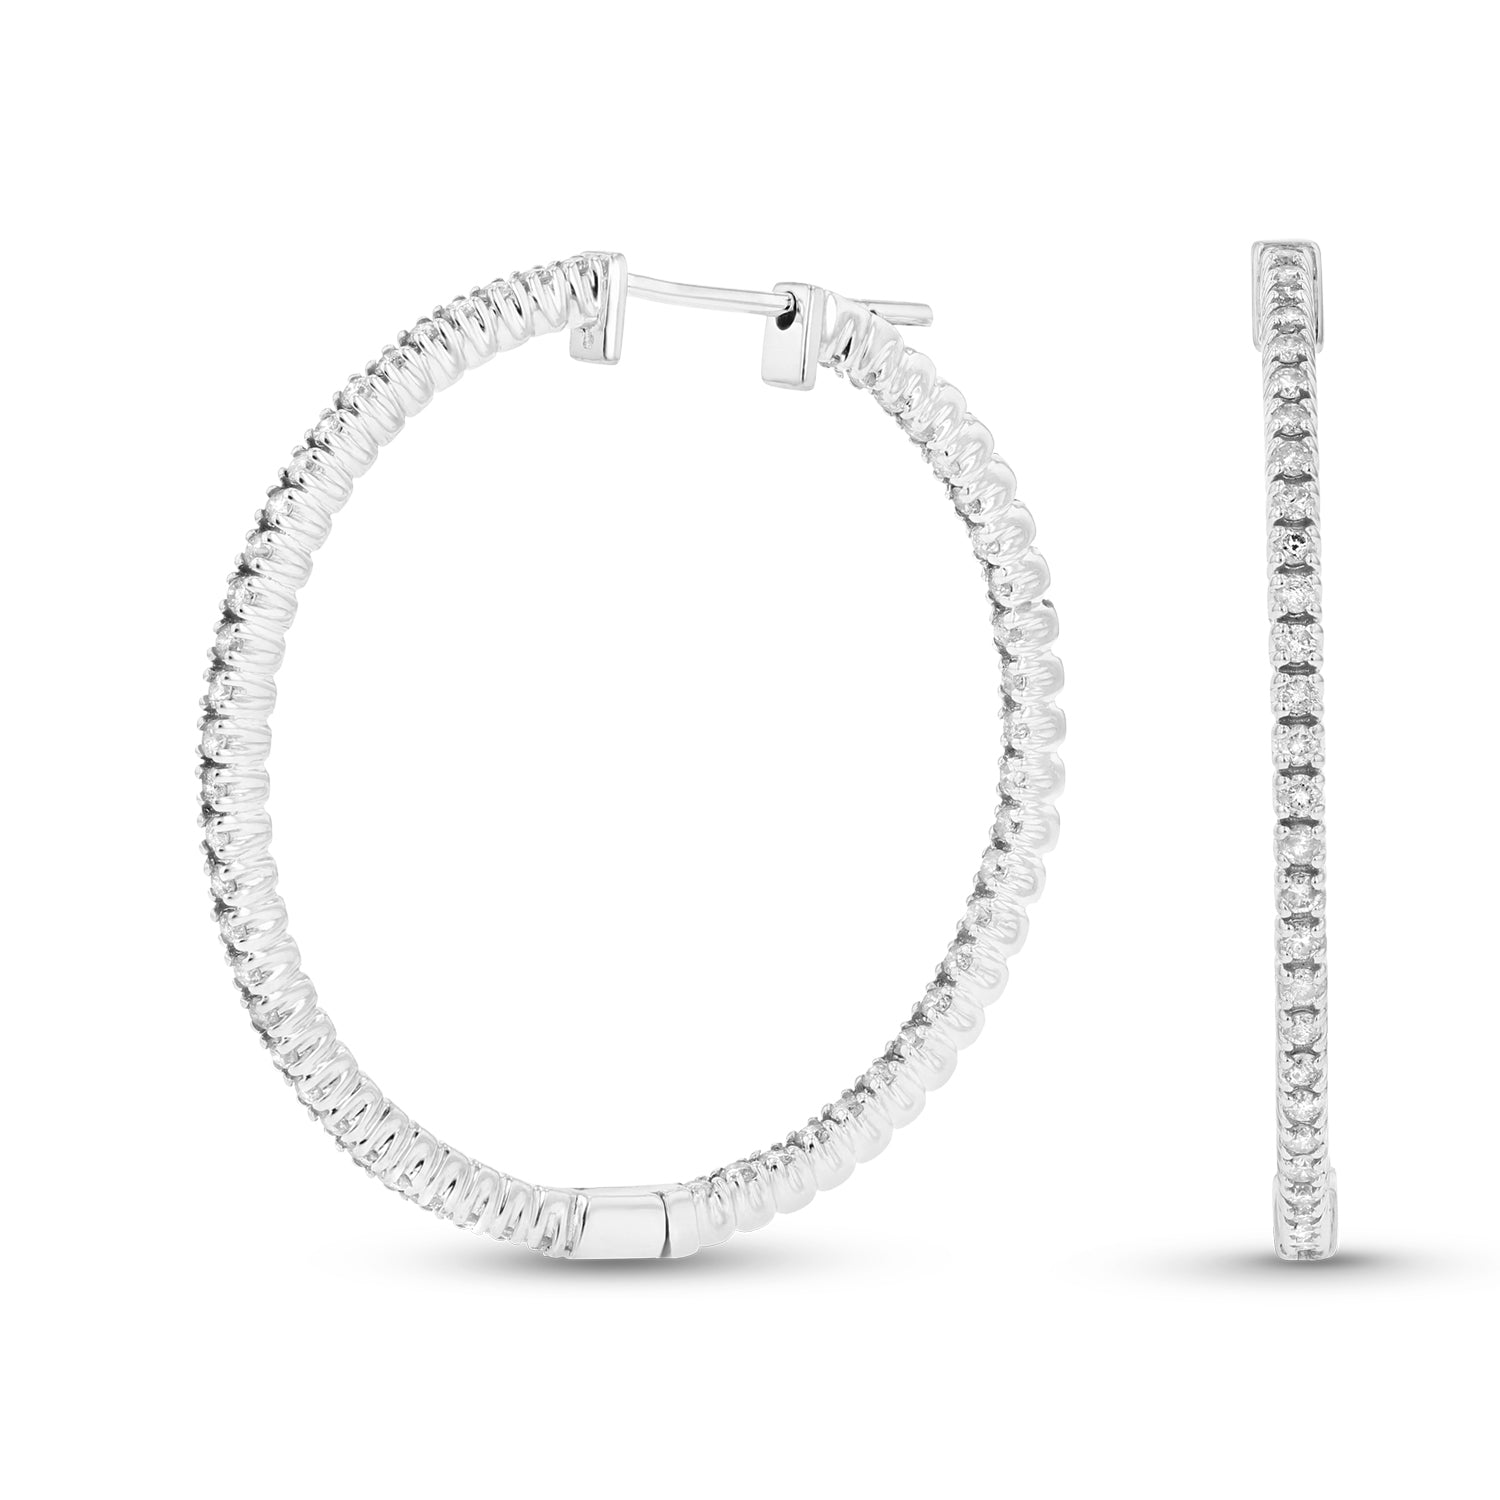 14k Gold Hoop Earrings with 1.10cttw of Diamonds. 1 1/4 Inches in Diameter - Crestwood Jewelers